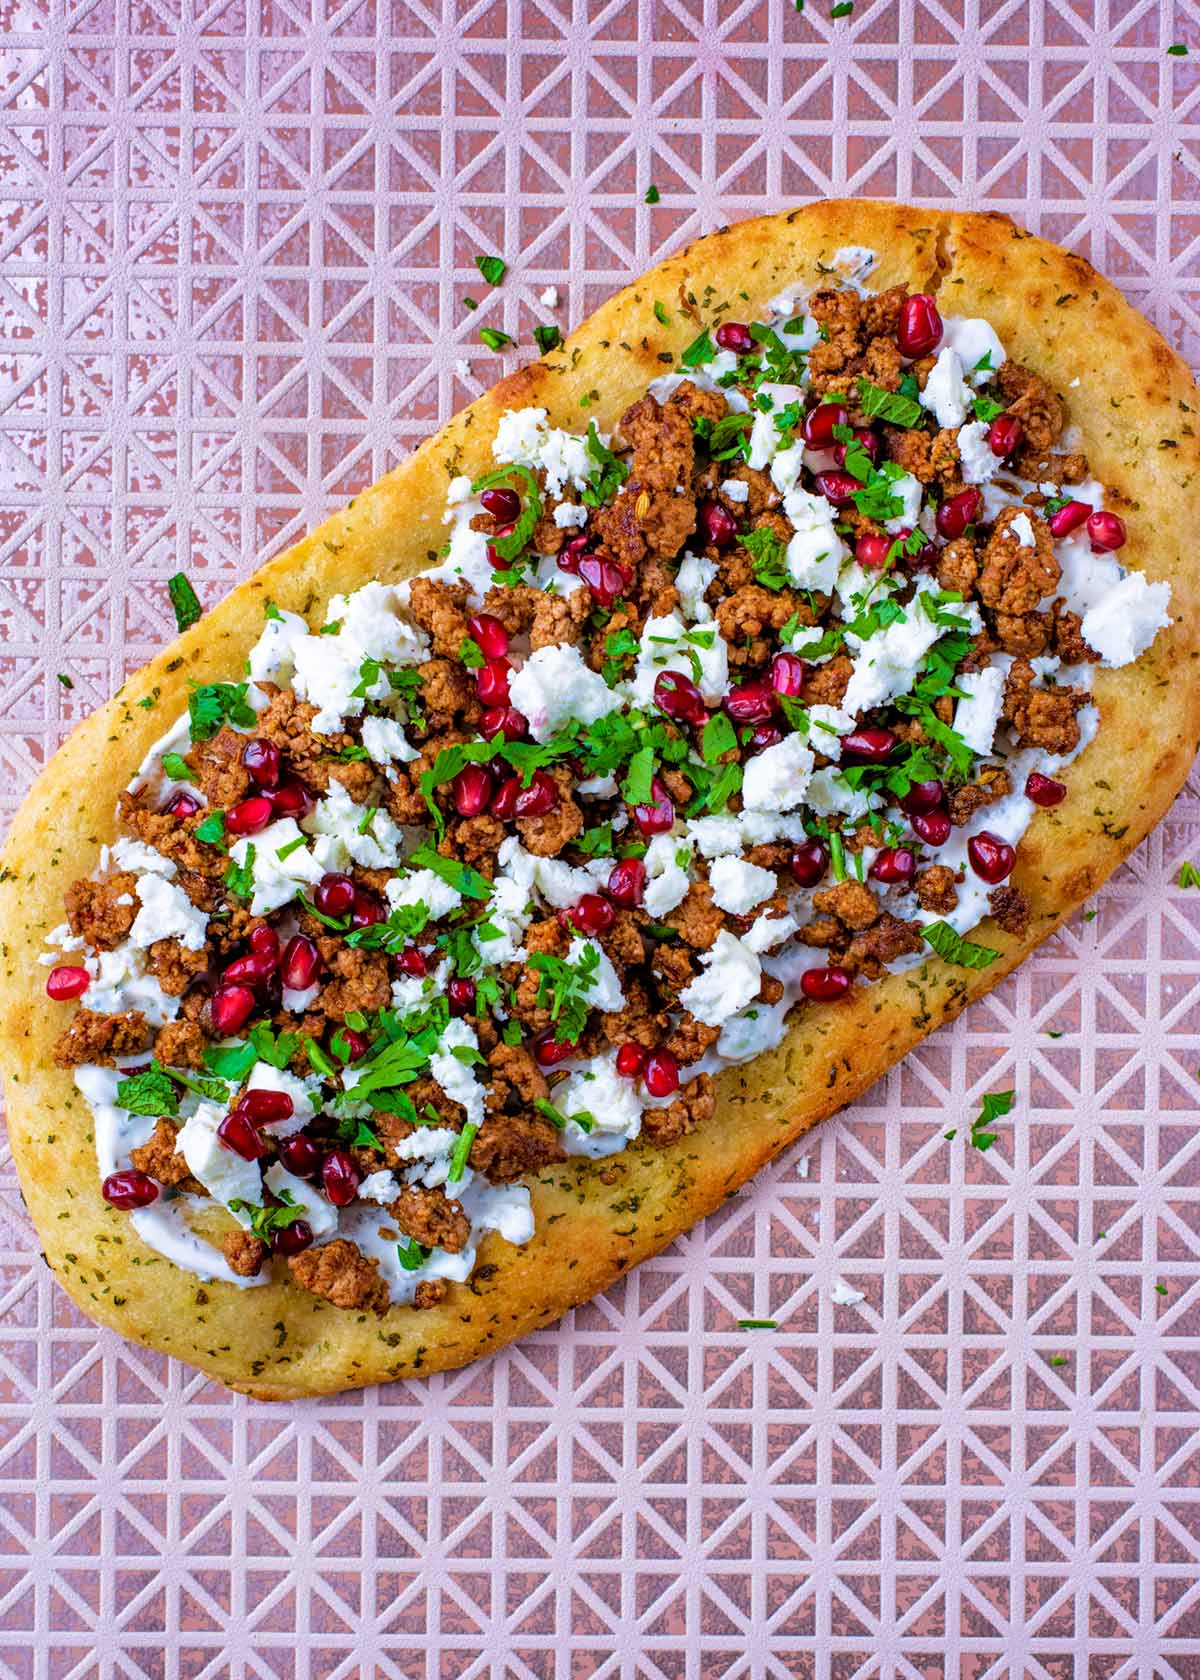 A flatbread topped with tzatziki, lamb, feta cheese, pomegranate seeds and herbs.